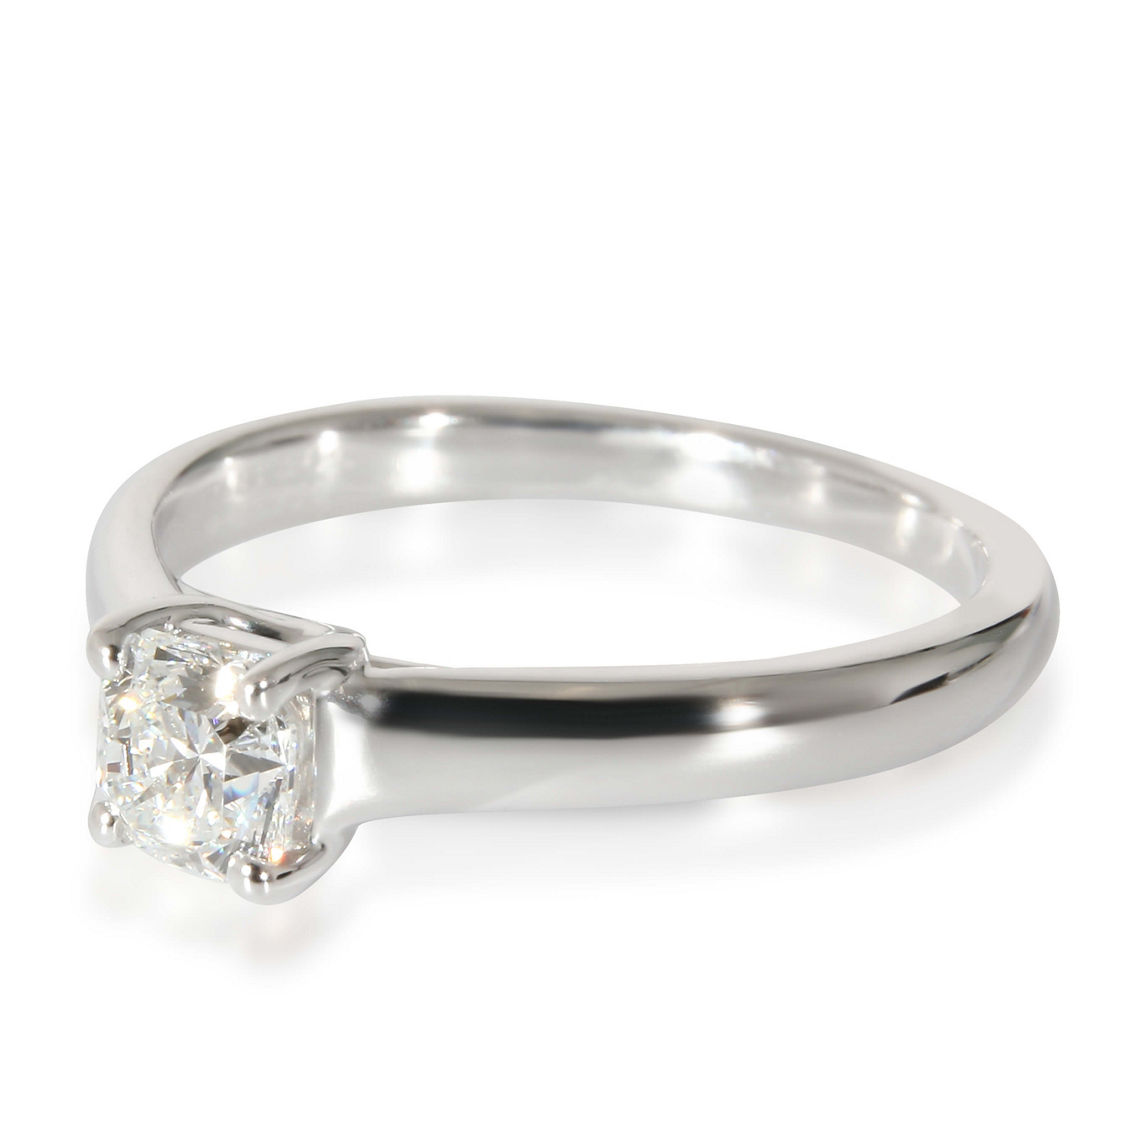 Tiffany & Co. Lucida Engagement Ring Pre-Owned - Image 2 of 4